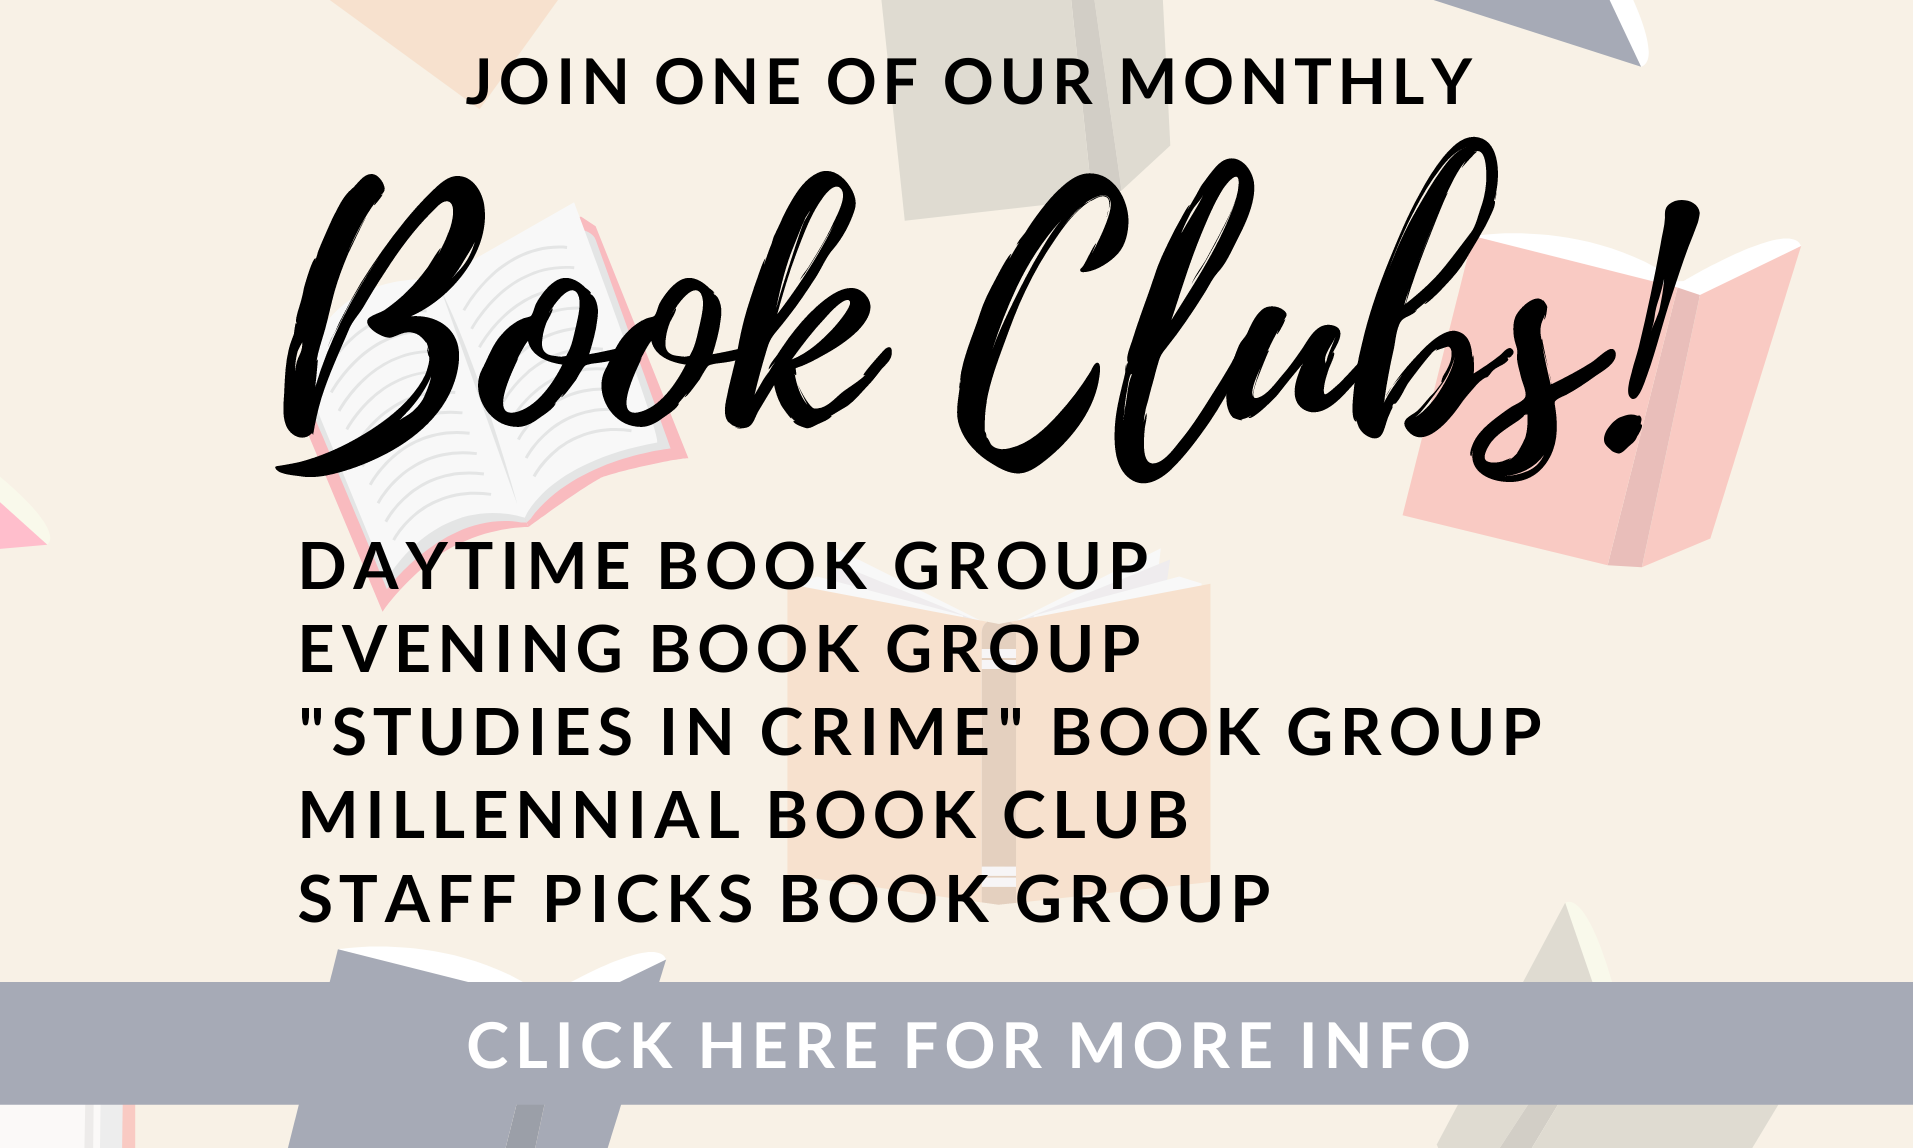 Join one of our monthly Book Clubs! Daytime Book Group, Evening Book Group, Studies in Crime Book Club, Millennial Book Club, Staff Picks Book Group, Click Here for more info.